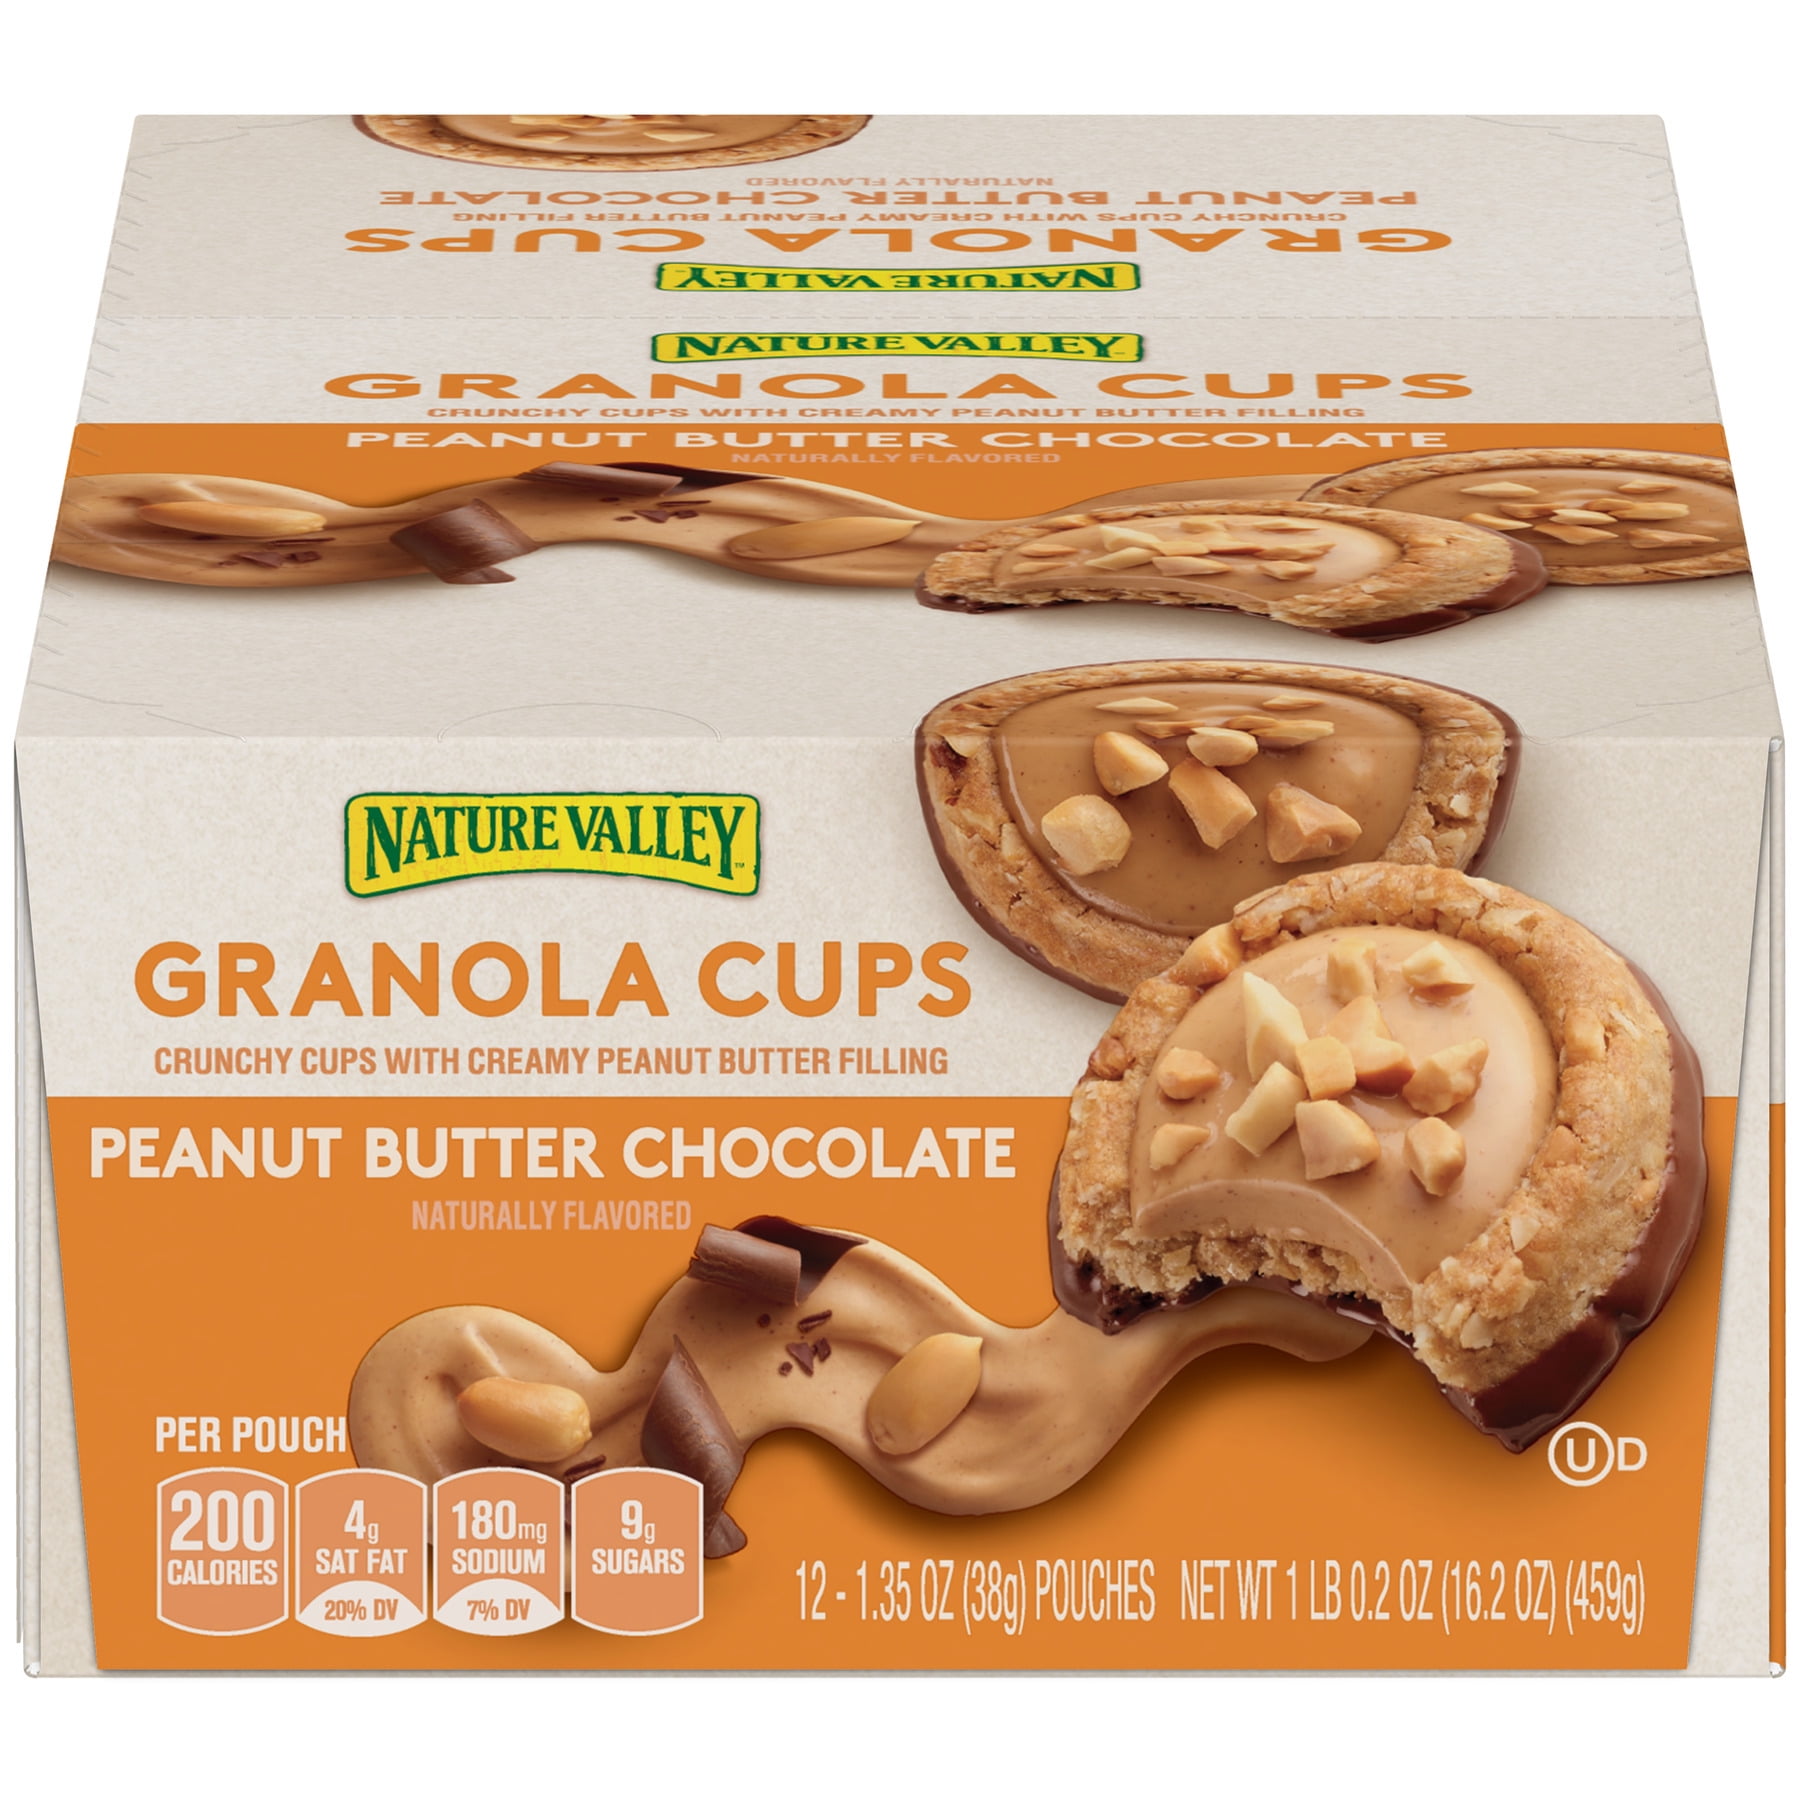 Nature Valley Peanut Butter Chocolate Granola Cups ...